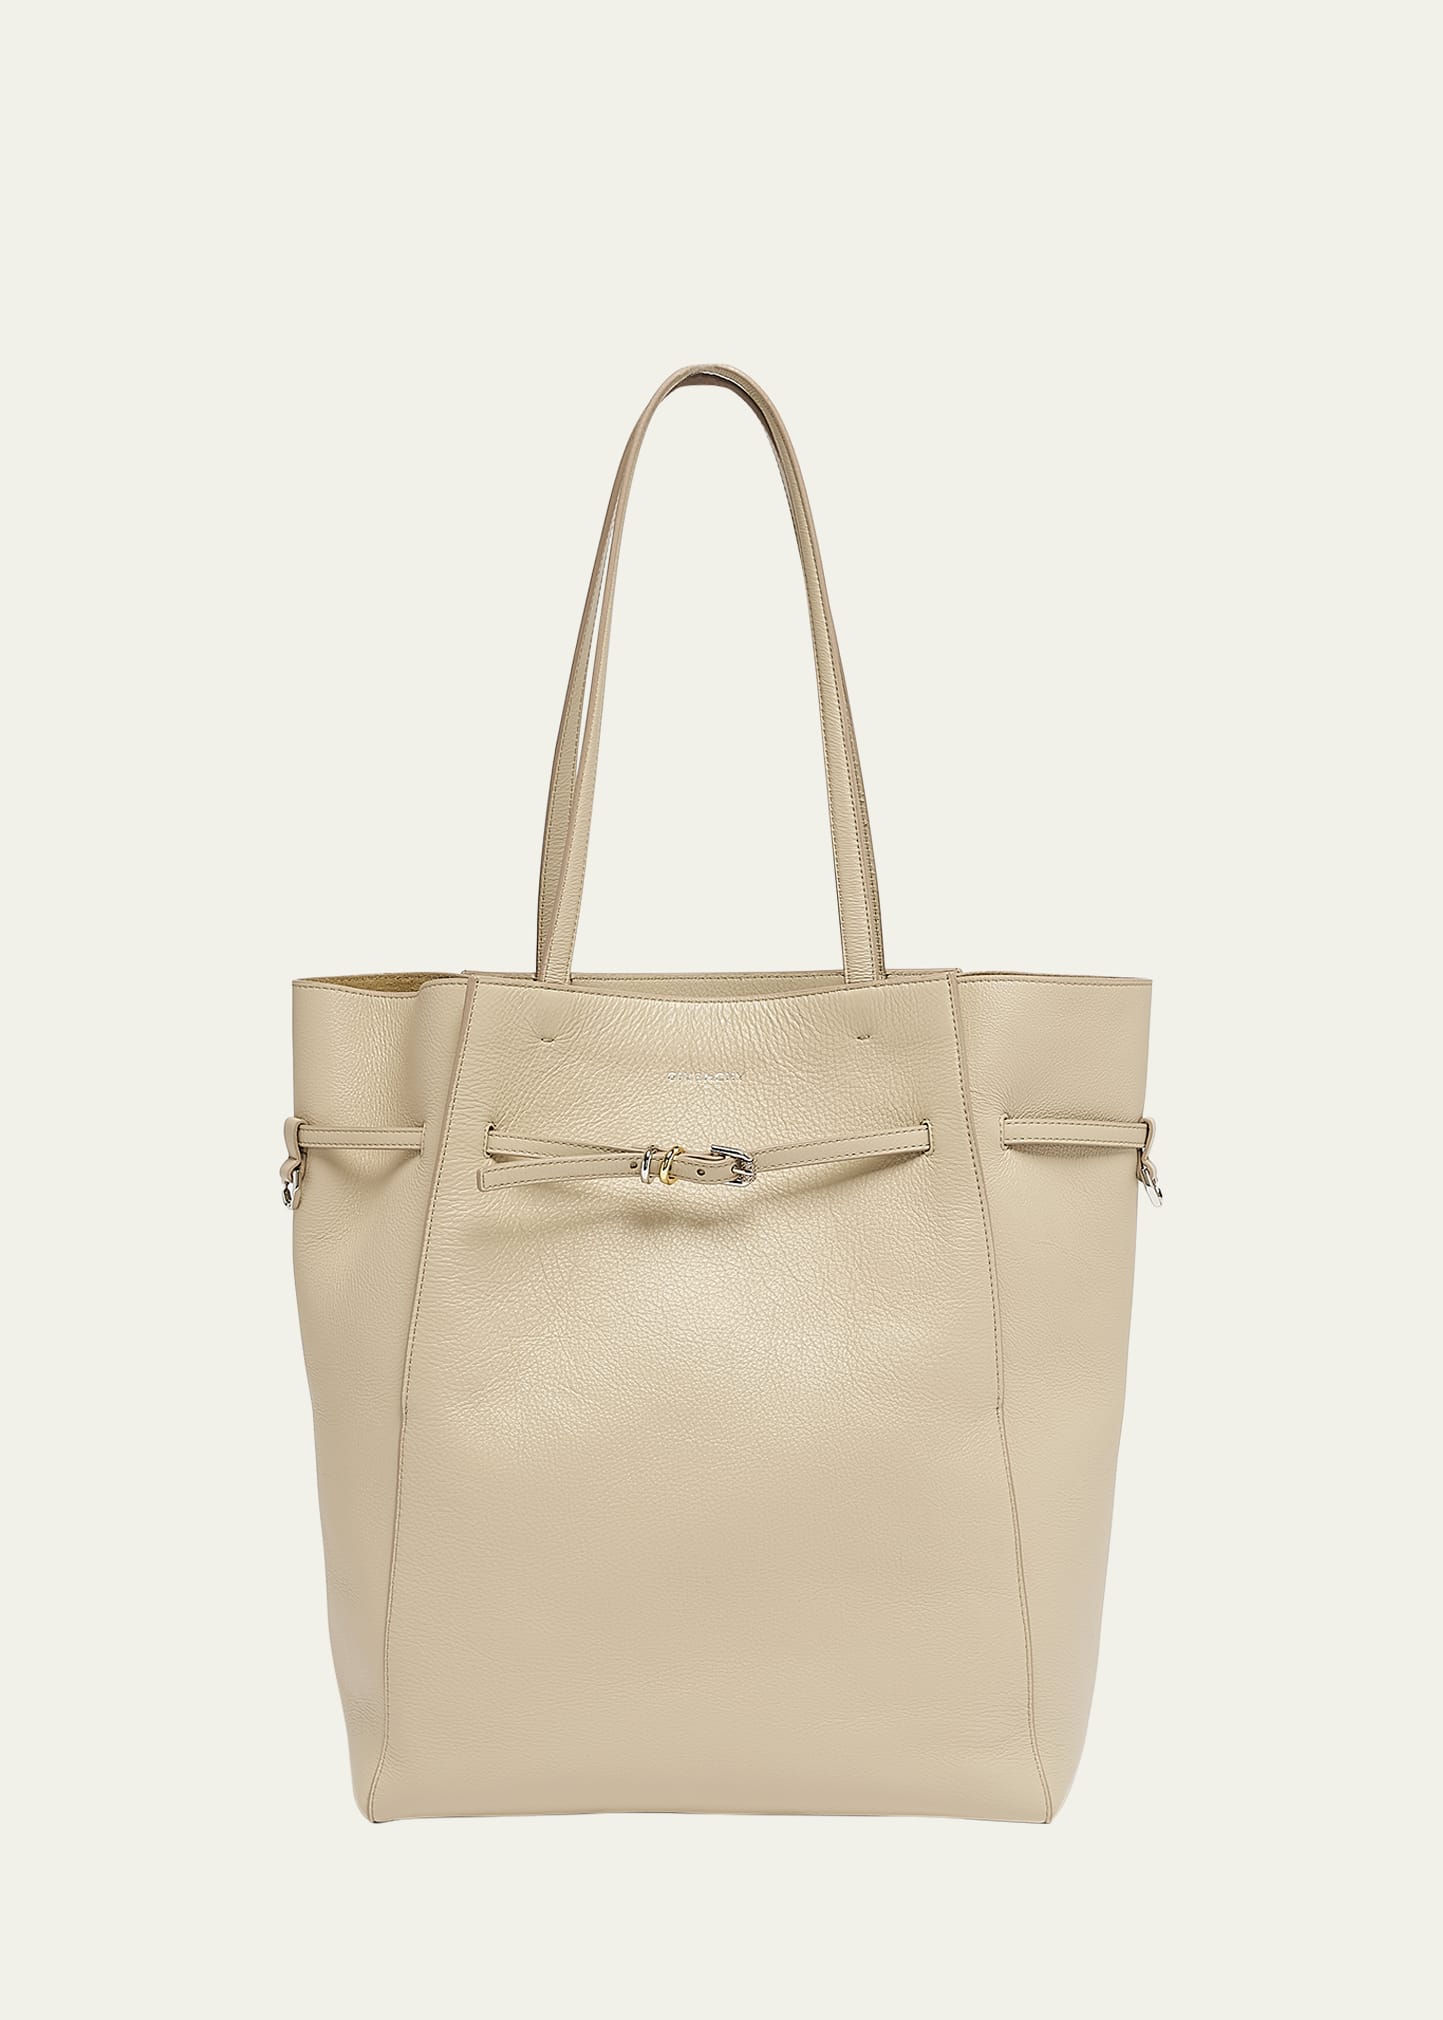 Voyou Medium North-South Tote Bag in Tumbled Leather